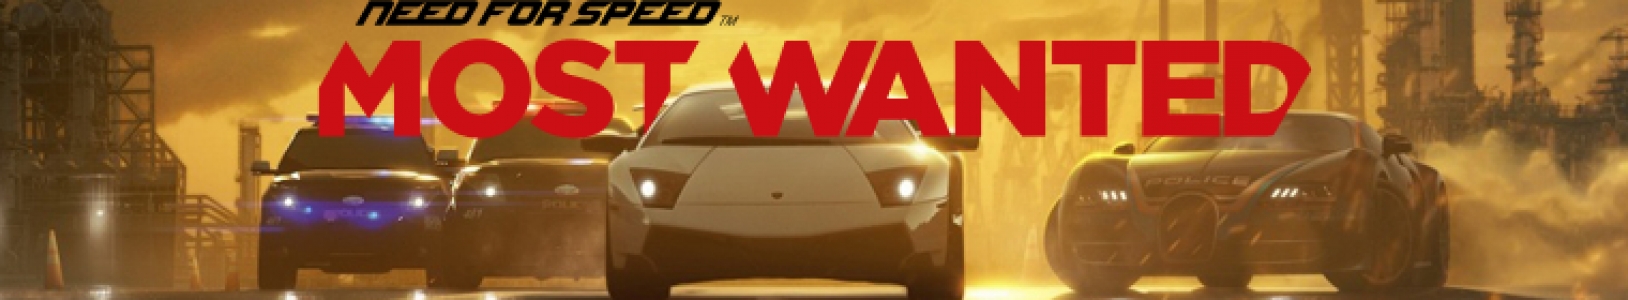 Need for Speed: Most Wanted - A Criterion Game banner